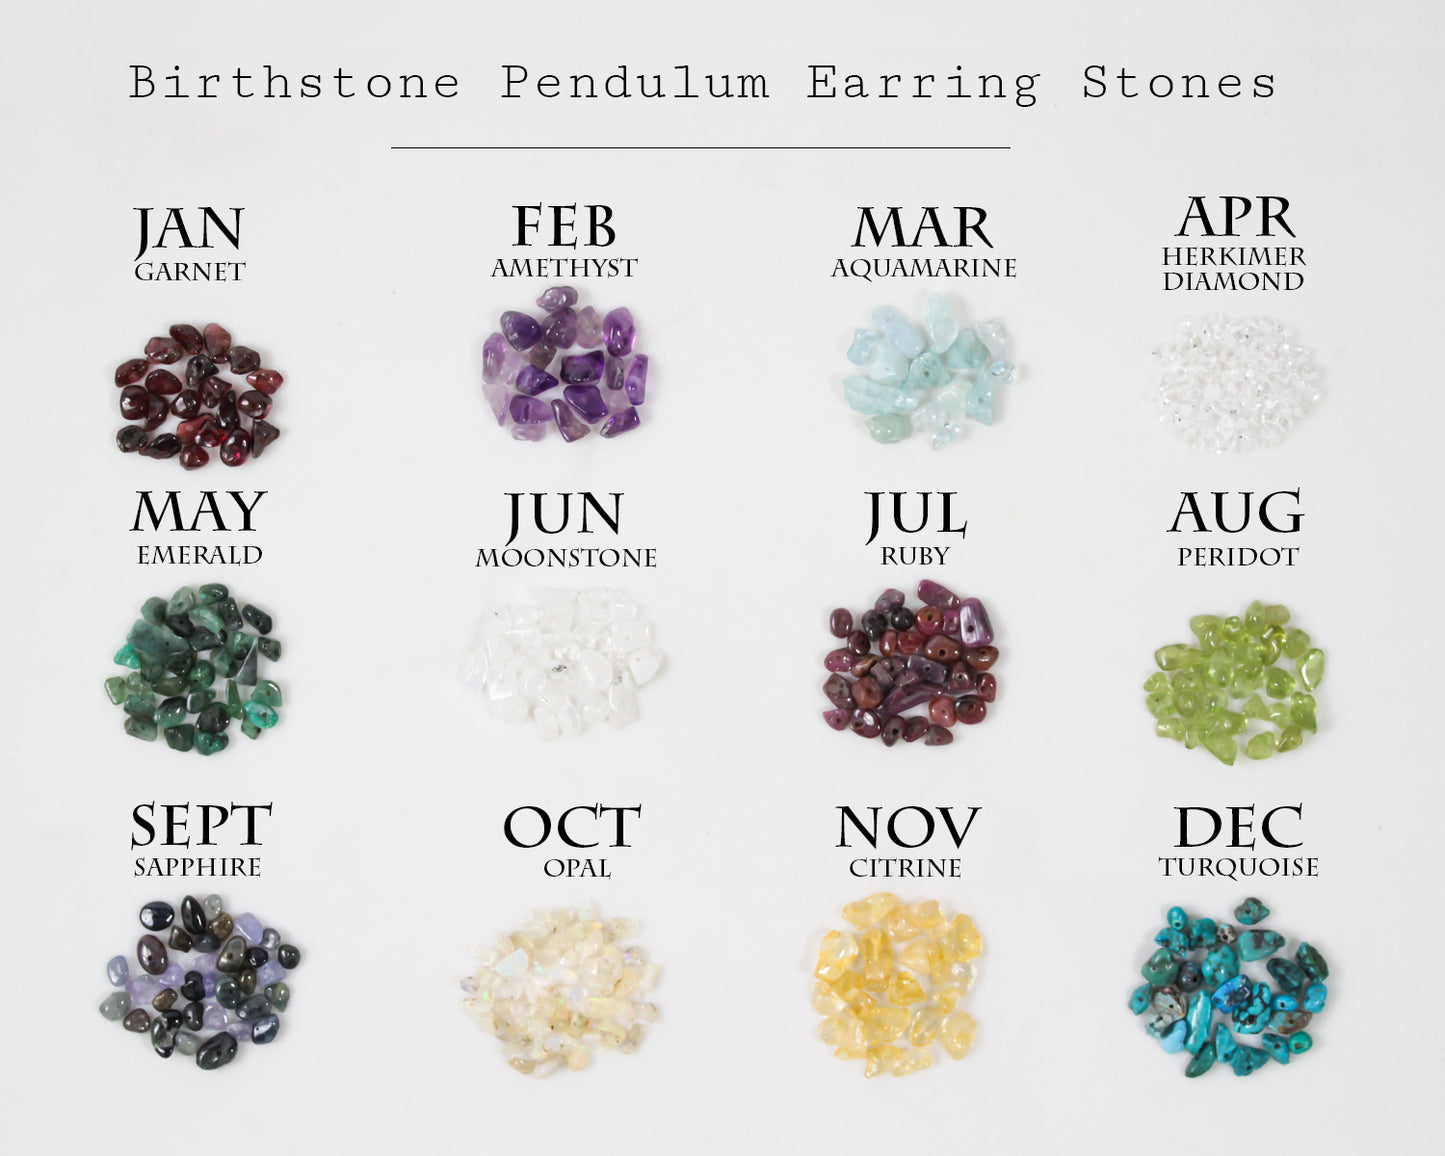 Image shows piles of the stones offered in the Birthstone Bar Earrings to show variations in both size of stone and color. Offered: garnet, amethyst, aquamarine, Herkimer diamond, emerald, moonstone, ruby, peridot, sapphire, opal, citrine, turquoise.